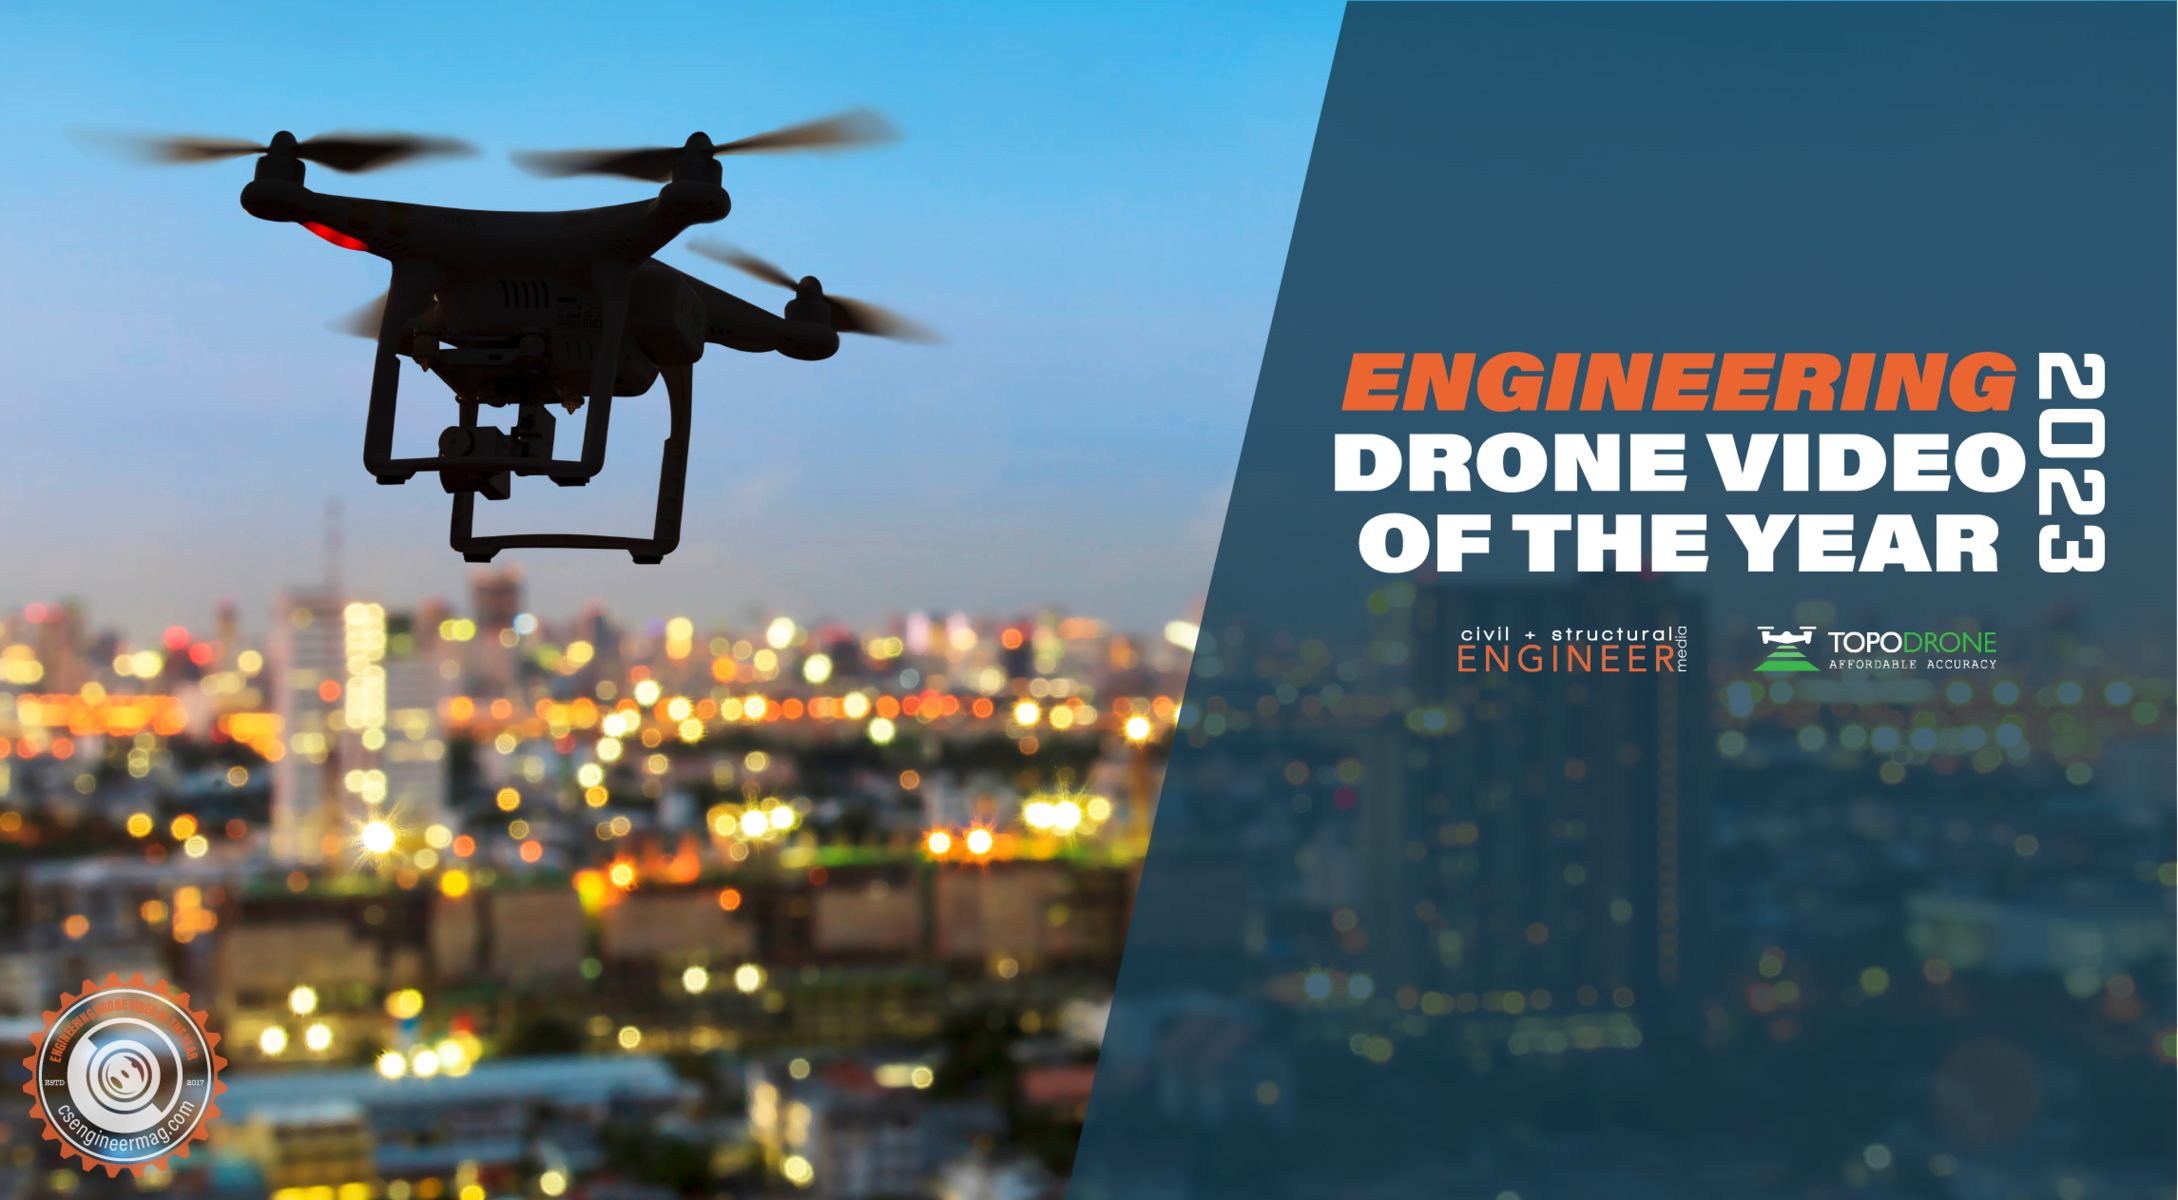 Engineering Drone Video of the Year Contest (EDVY)